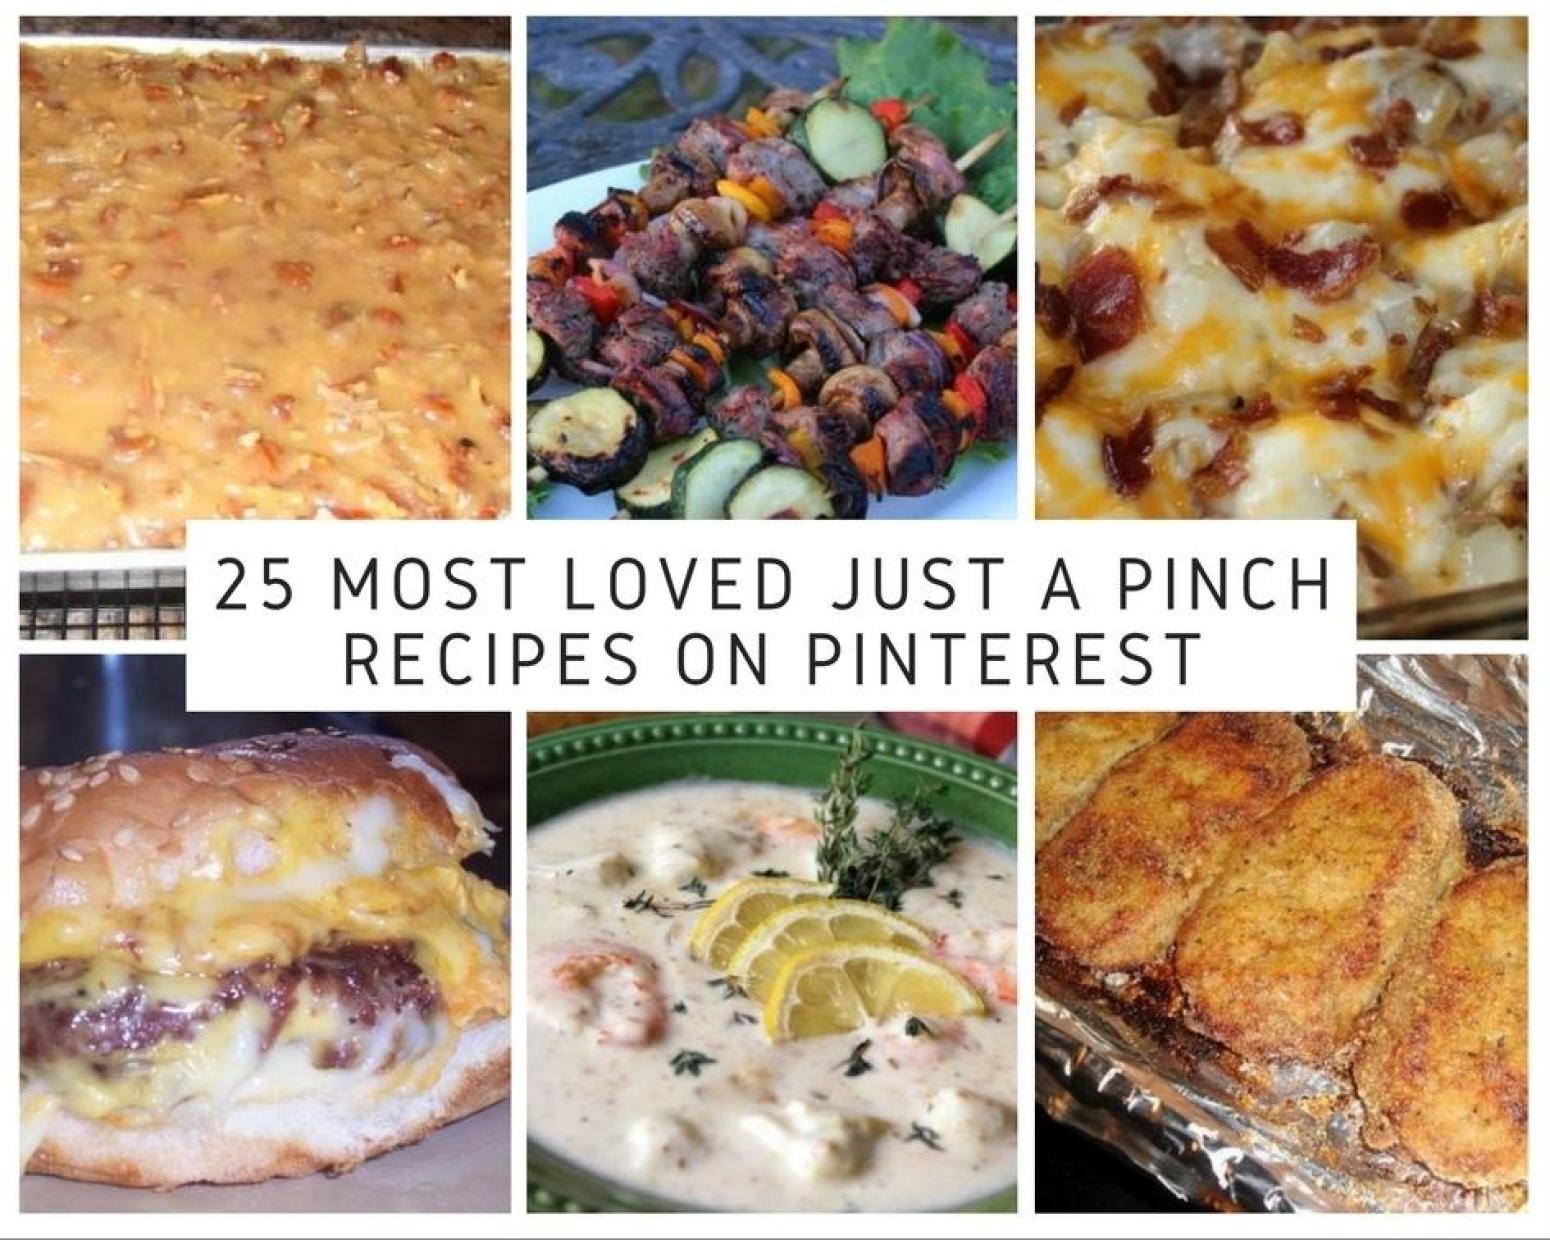 18 Most Loved Just A Pinch Recipes on Pinterest   Just A Pinch